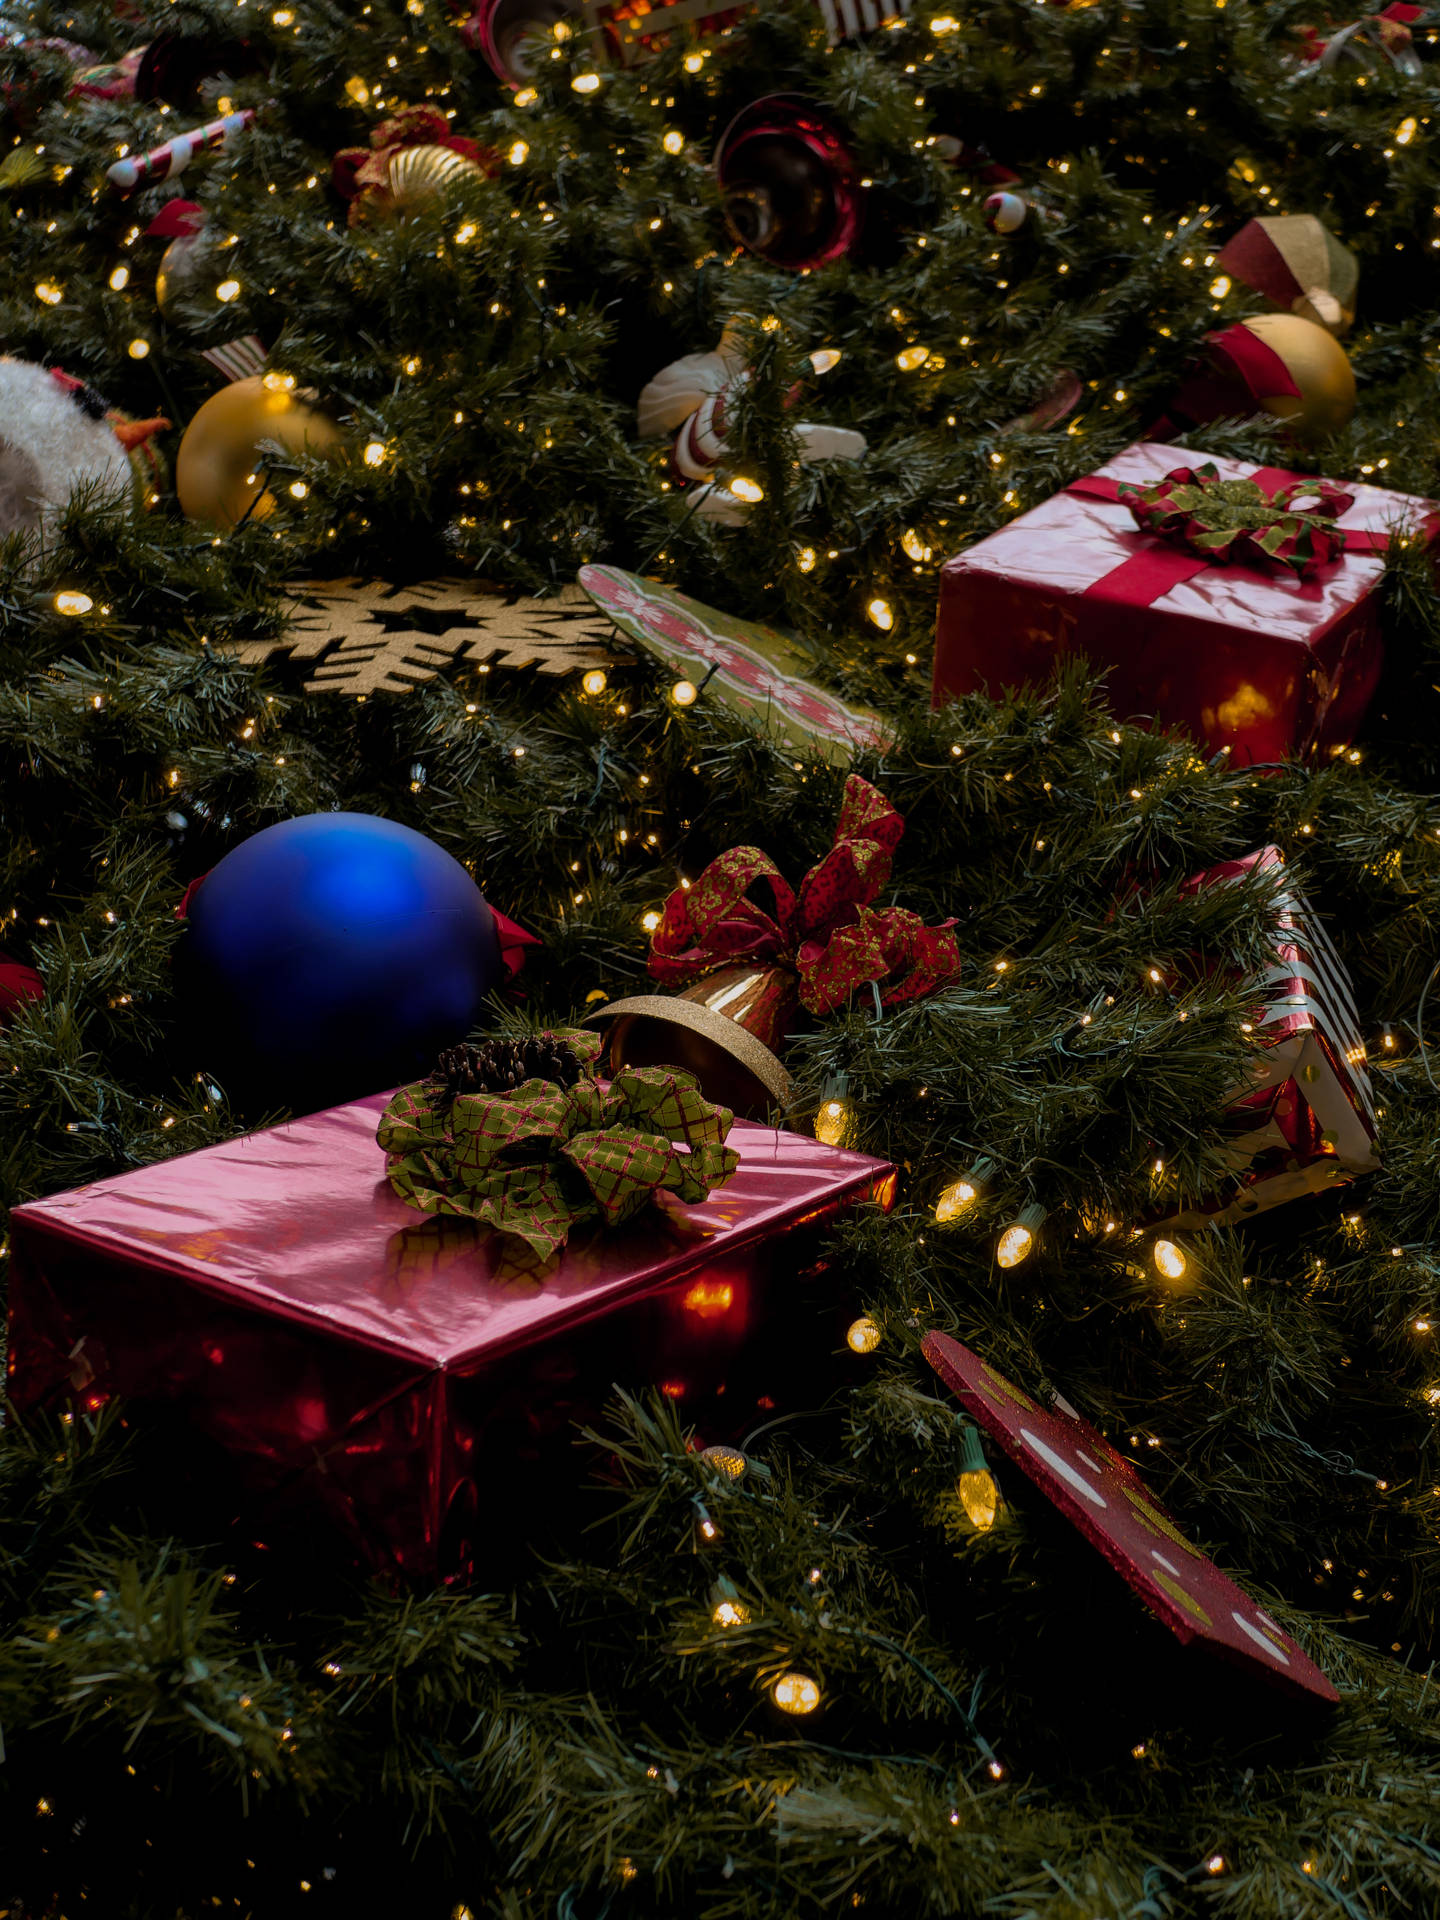 Ring in the New Year with a festive Christmas tree full of decorations and presents! Wallpaper